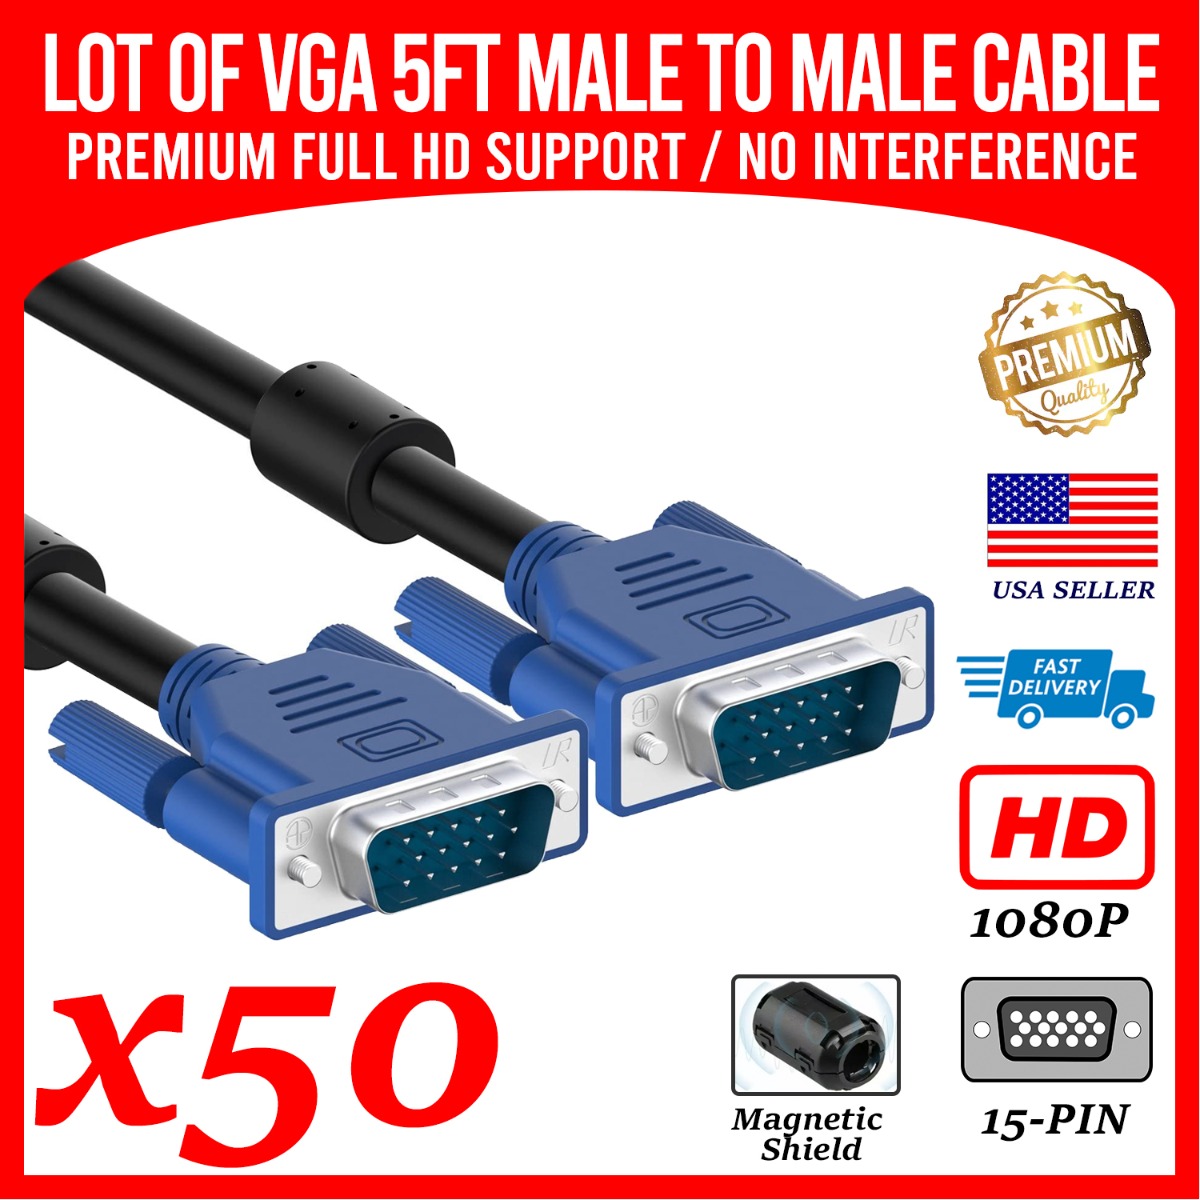 50 Pack of Brand New VGA Cable Excellent Quality No Interference Full